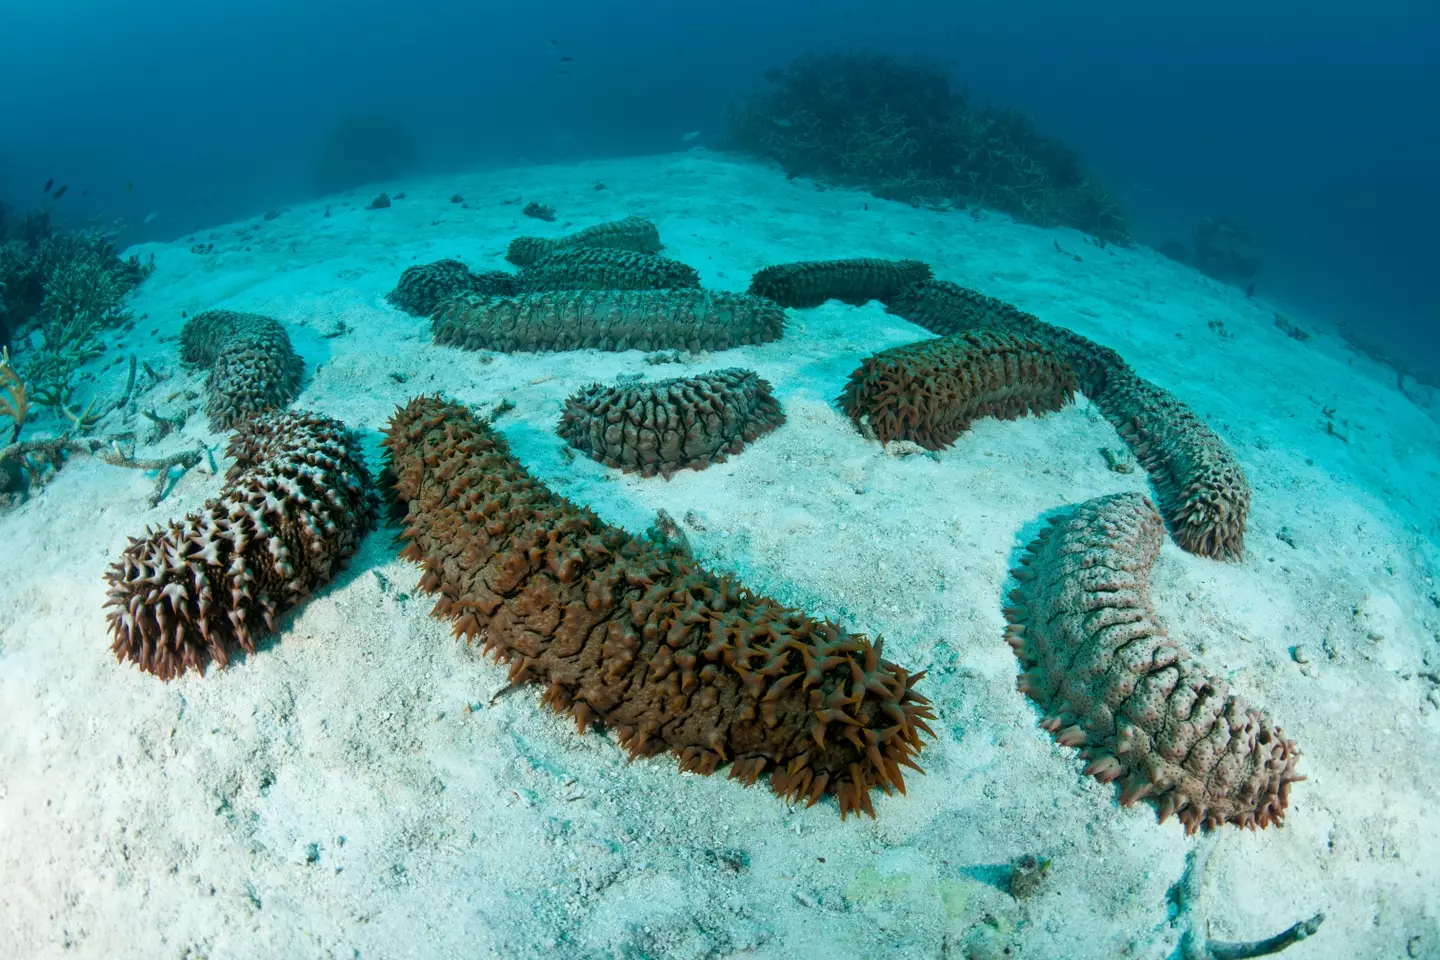 An expert has revealed why divers go to such lengths to retrieve sea cucumbers.